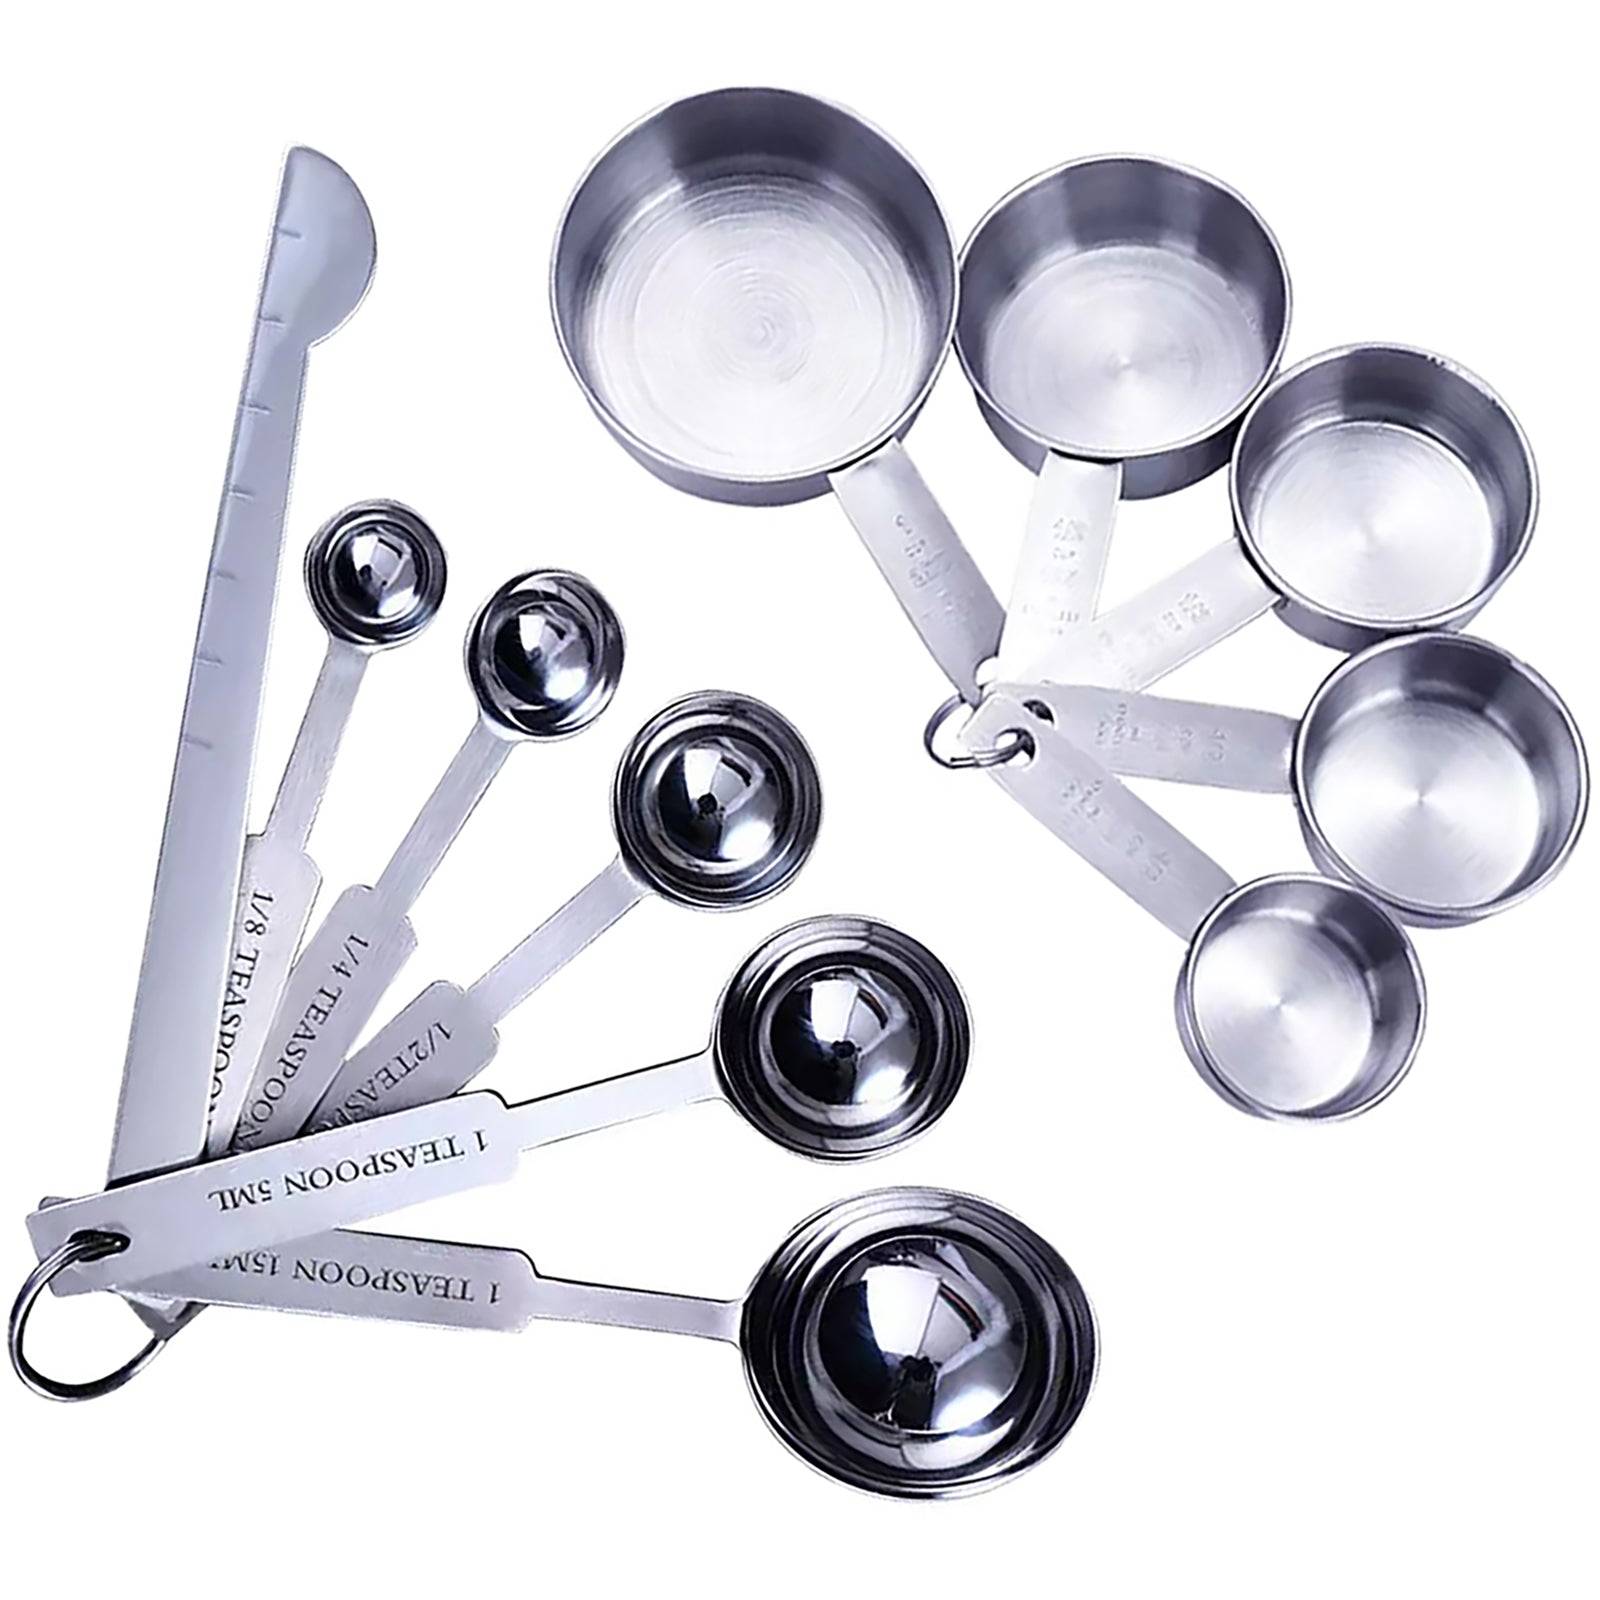 Stainless Steel Measuring Spoons and Cups Set